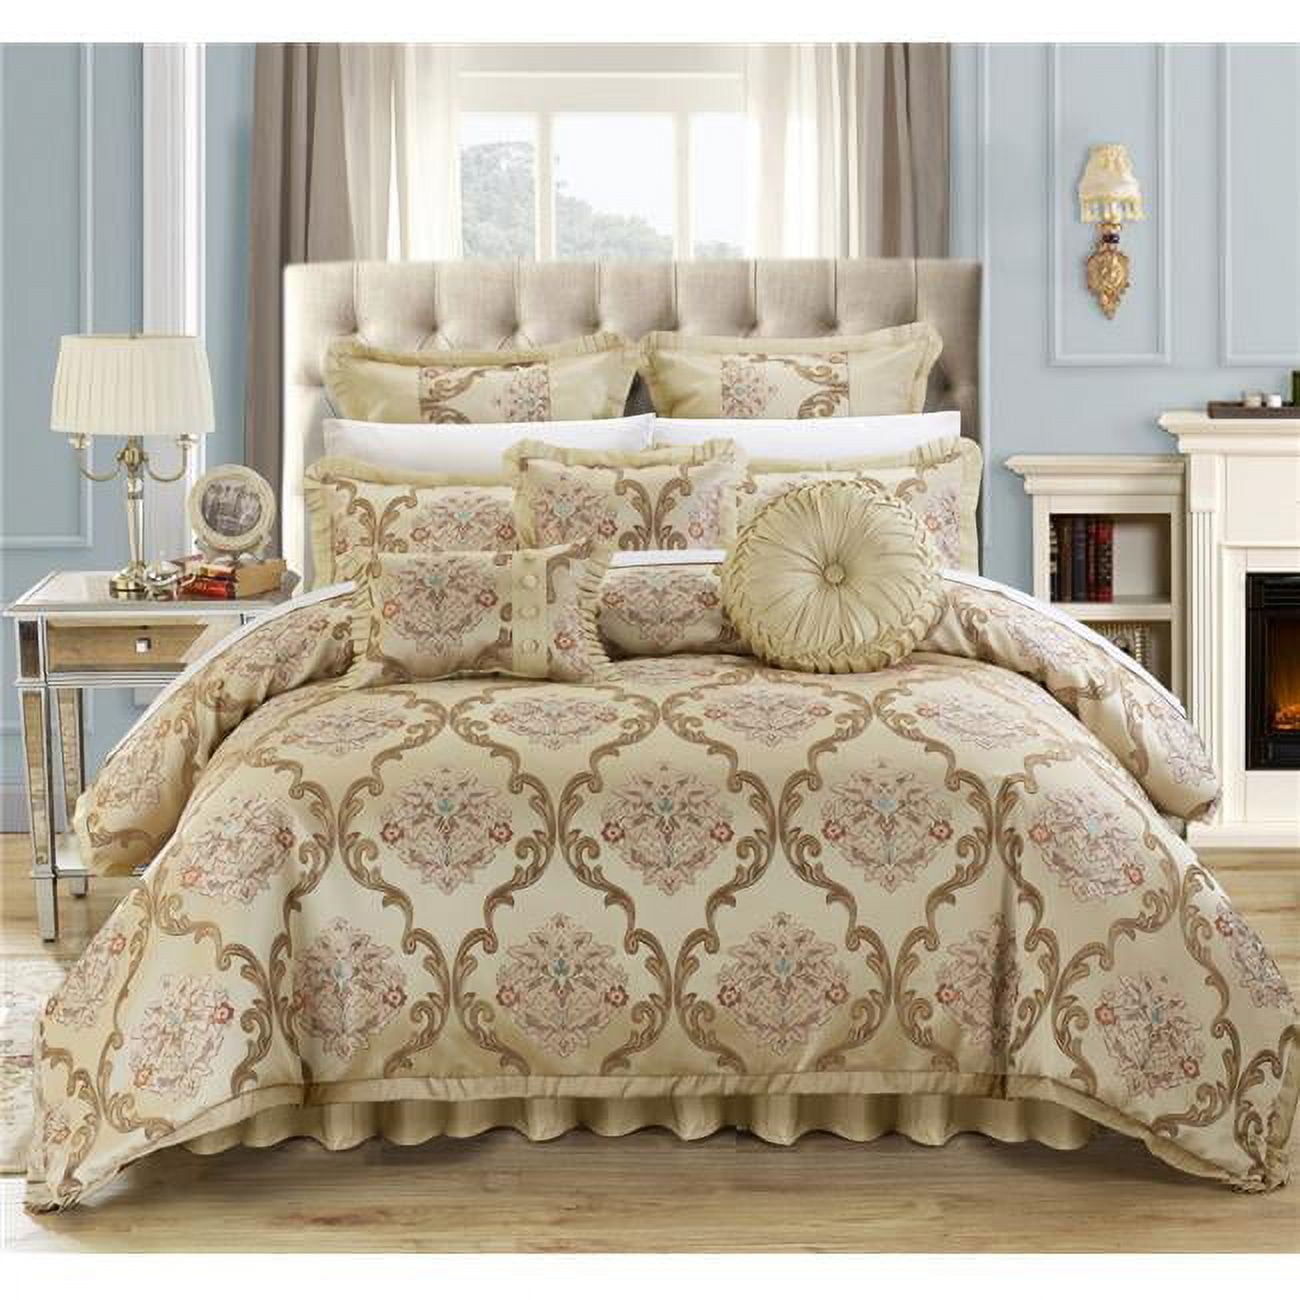 Angelo Decorator Upholstery Quality Jacquard Scroll Fabric Complete Master Bedroom Comforter Set & Pillows Ensemble - Beige - King - 9 Piece